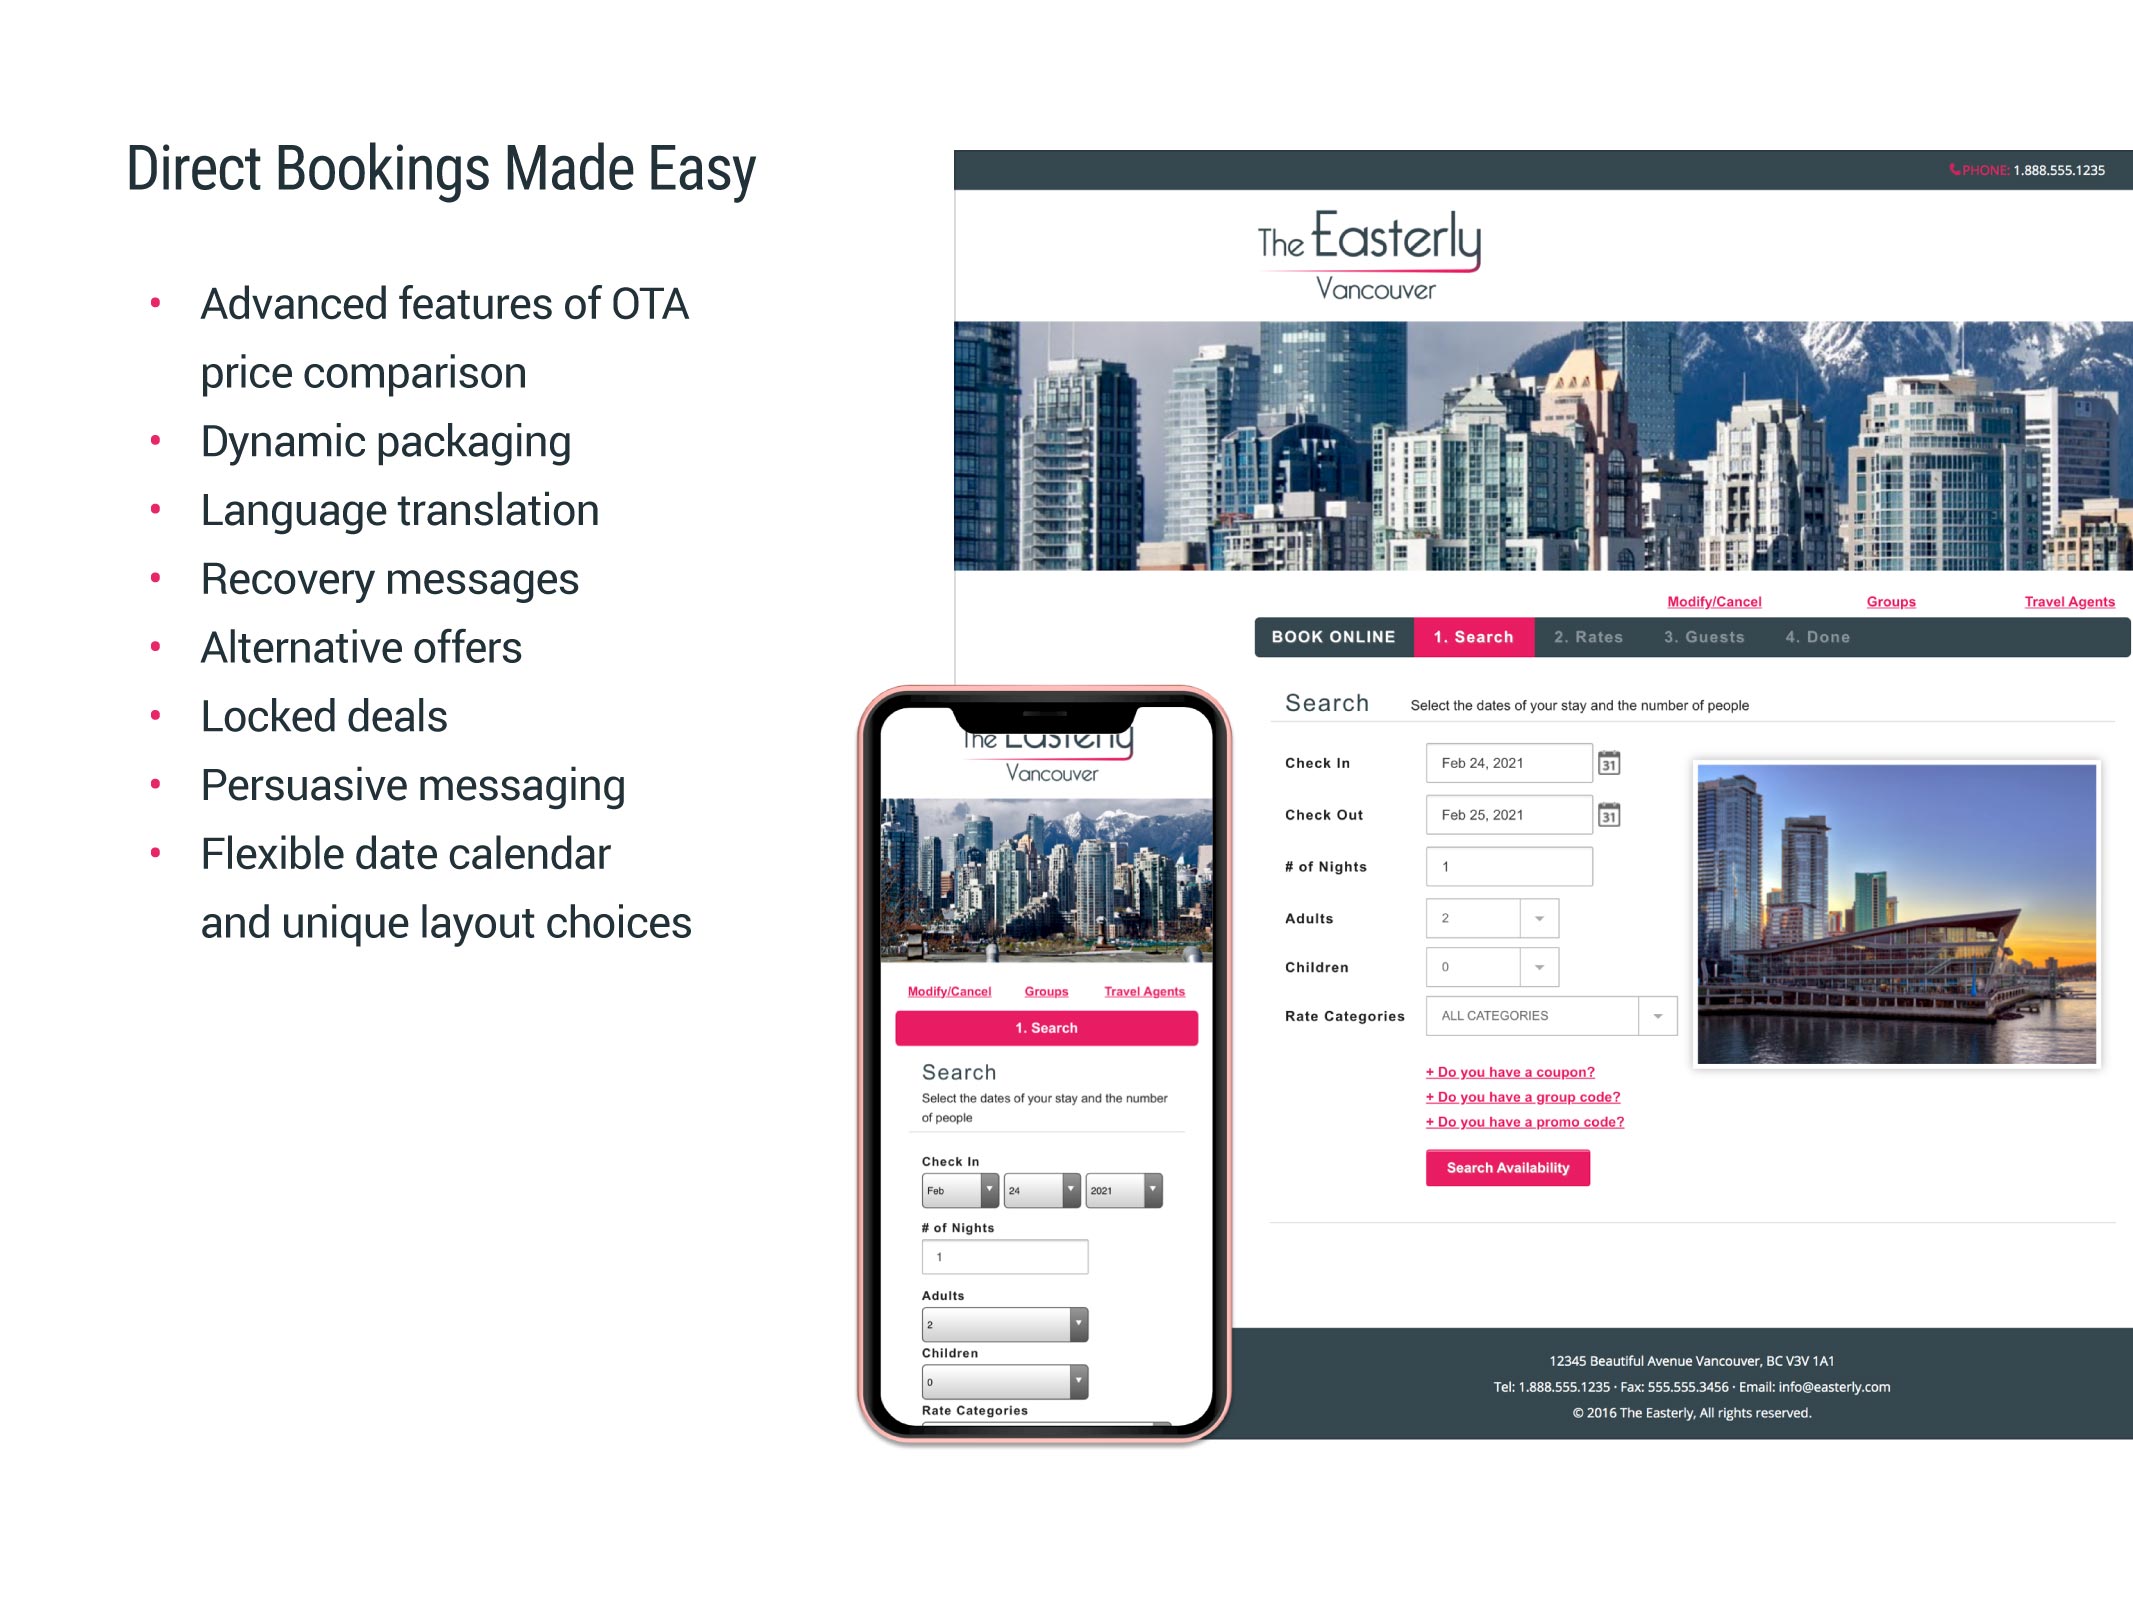 Direct Bookings Made Easy